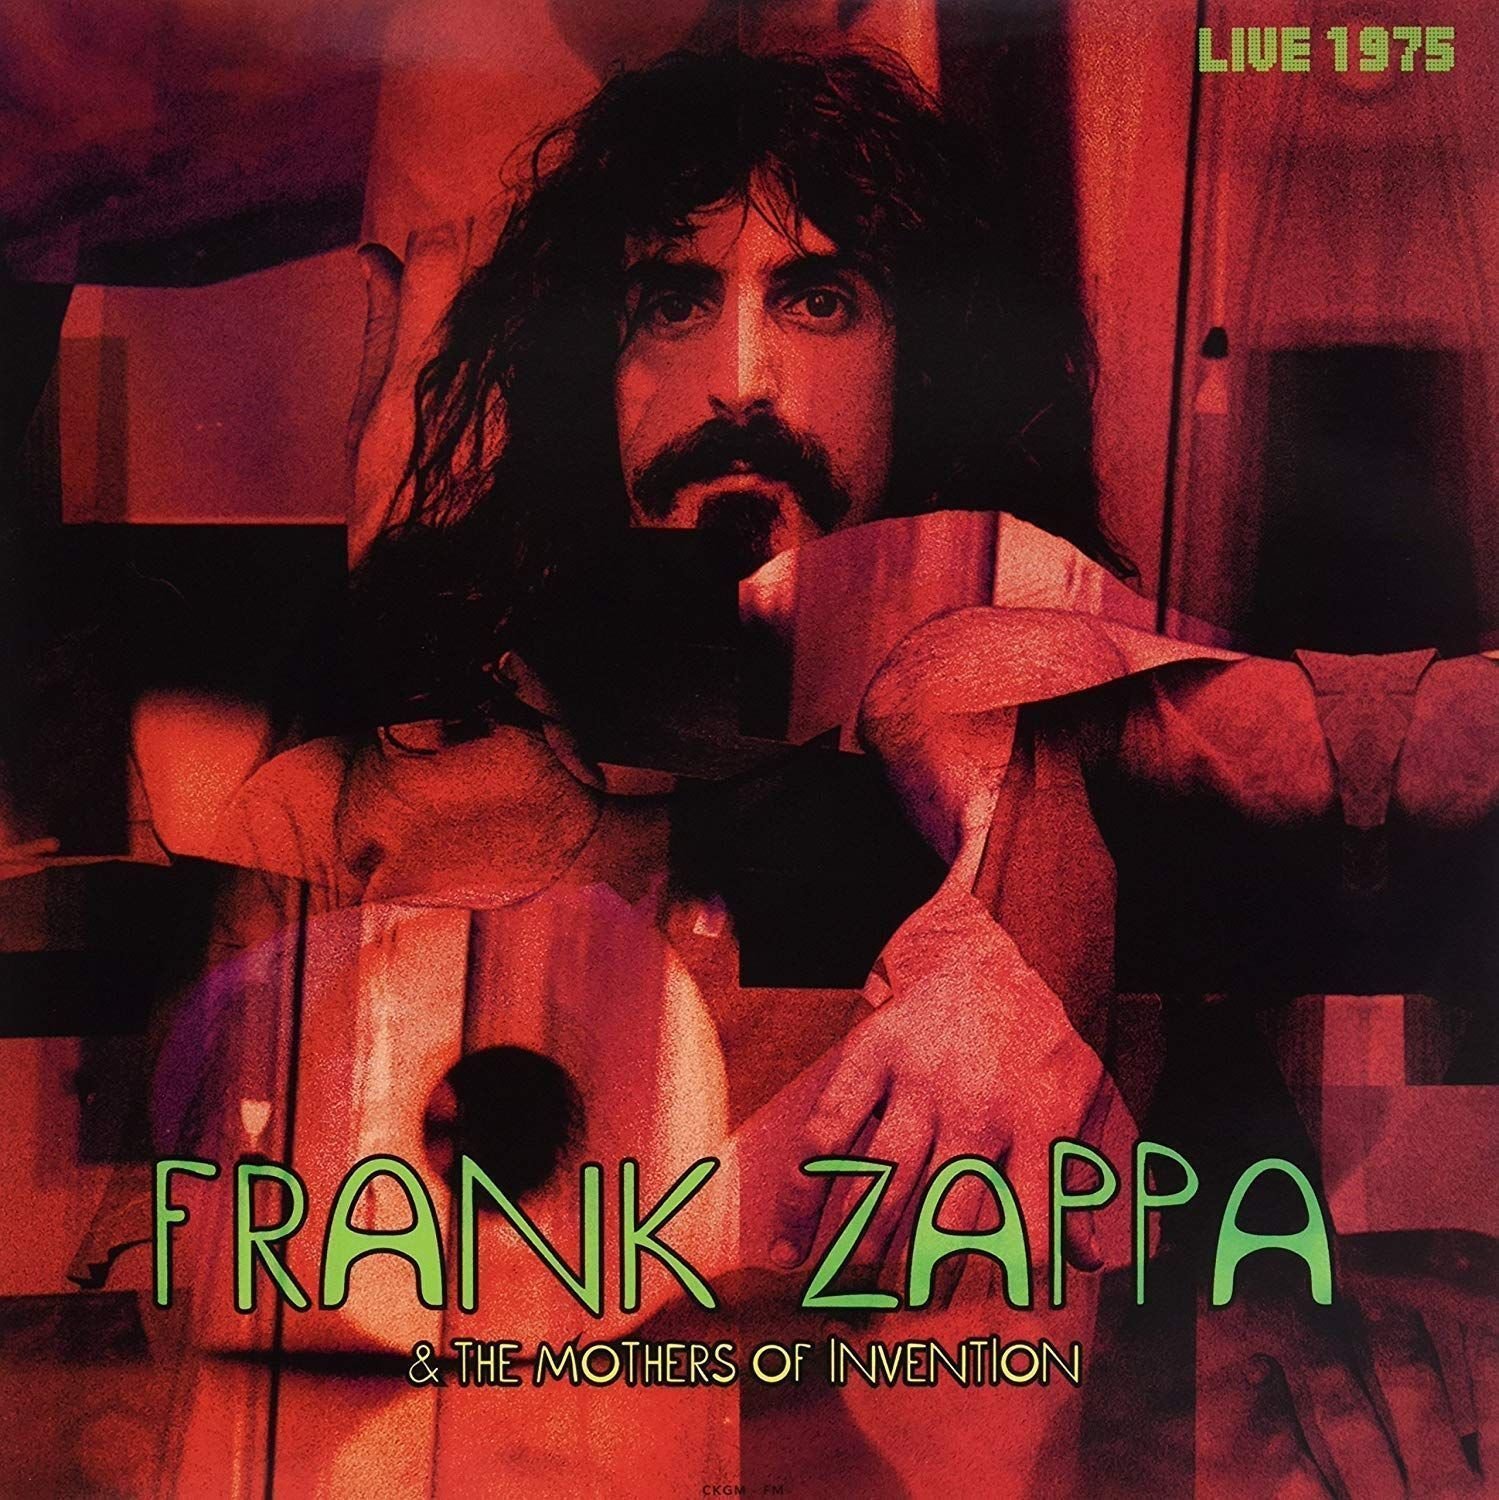 LP Frank Zappa - Live 1975 (Frank Zappa & The Mothers Of Invention) (2 LP)